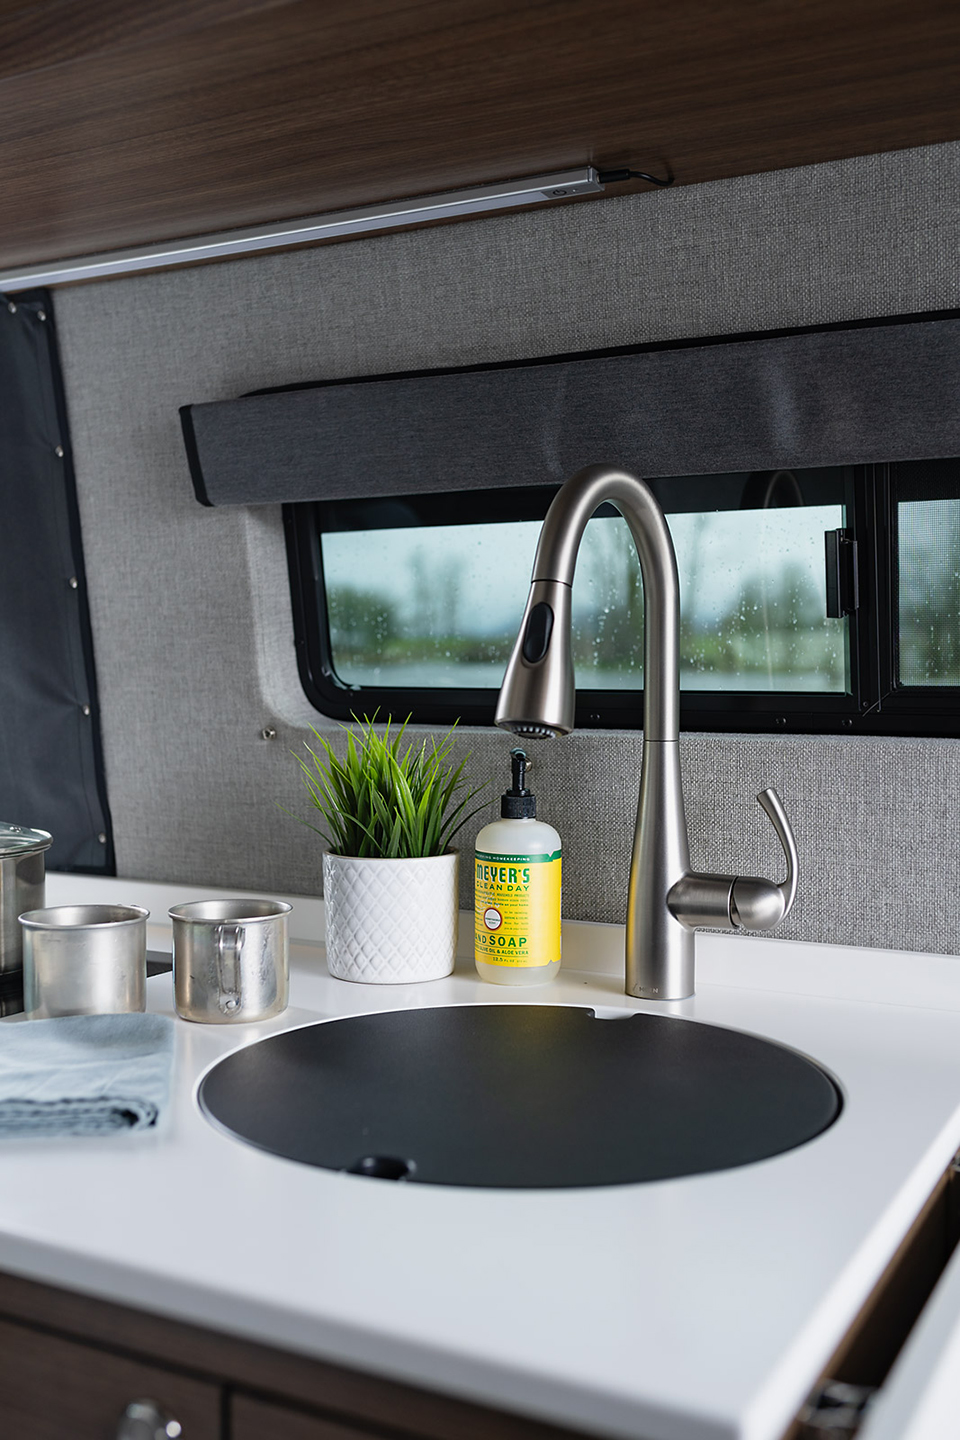 Galley kitchen counter with a faucet and covered sink